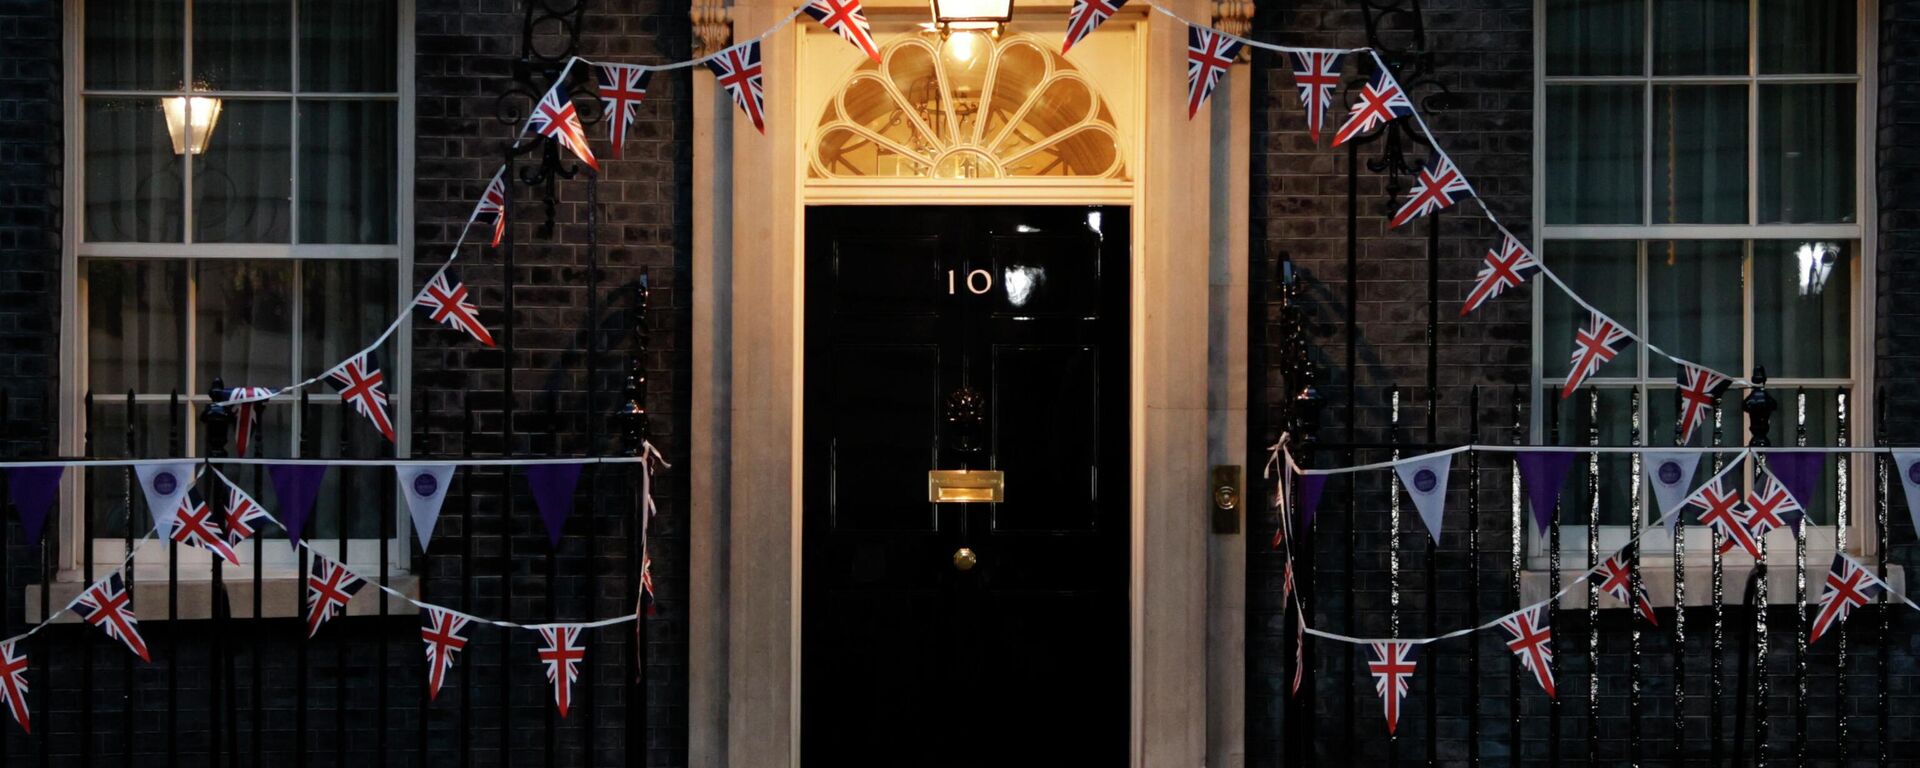 A general view at dusk of 10 Downing Street in London, Monday, June 6, 2022. British Prime Minister Boris Johnson survived a no-confidence vote on Monday, securing enough support from his Conservative Party to remain in office despite a rebellion that leaves him a weakened leader with an uncertain future. - Sputnik International, 1920, 12.07.2022